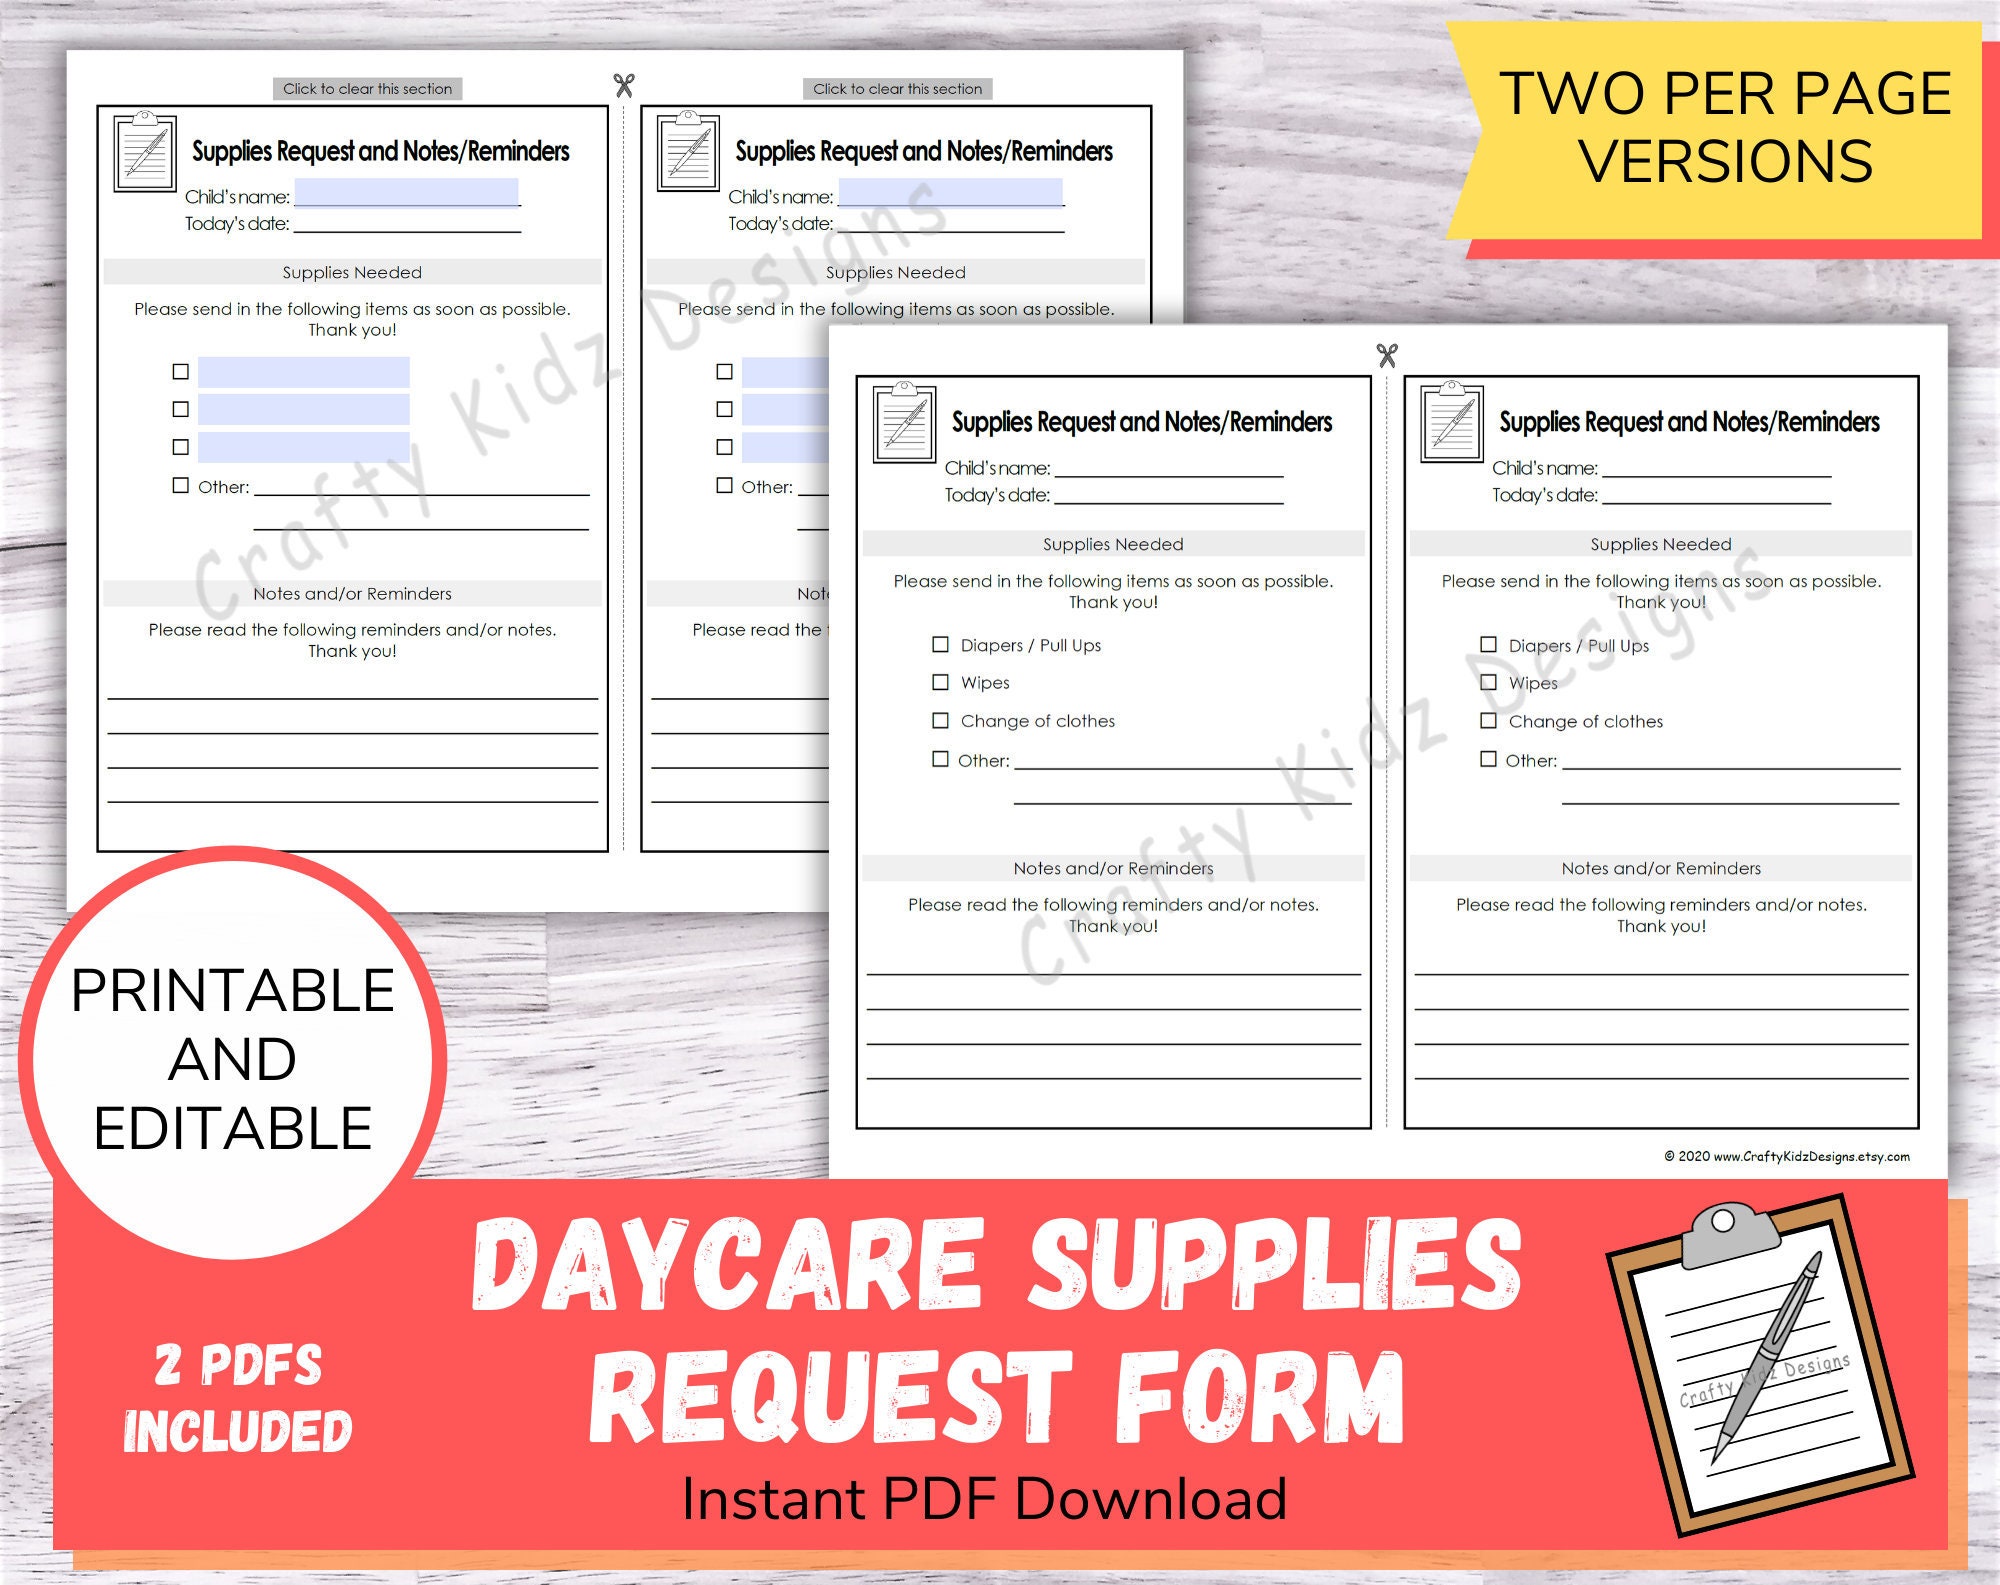 Daycare Supplies Request Form for Home Daycares, Childcare Centers